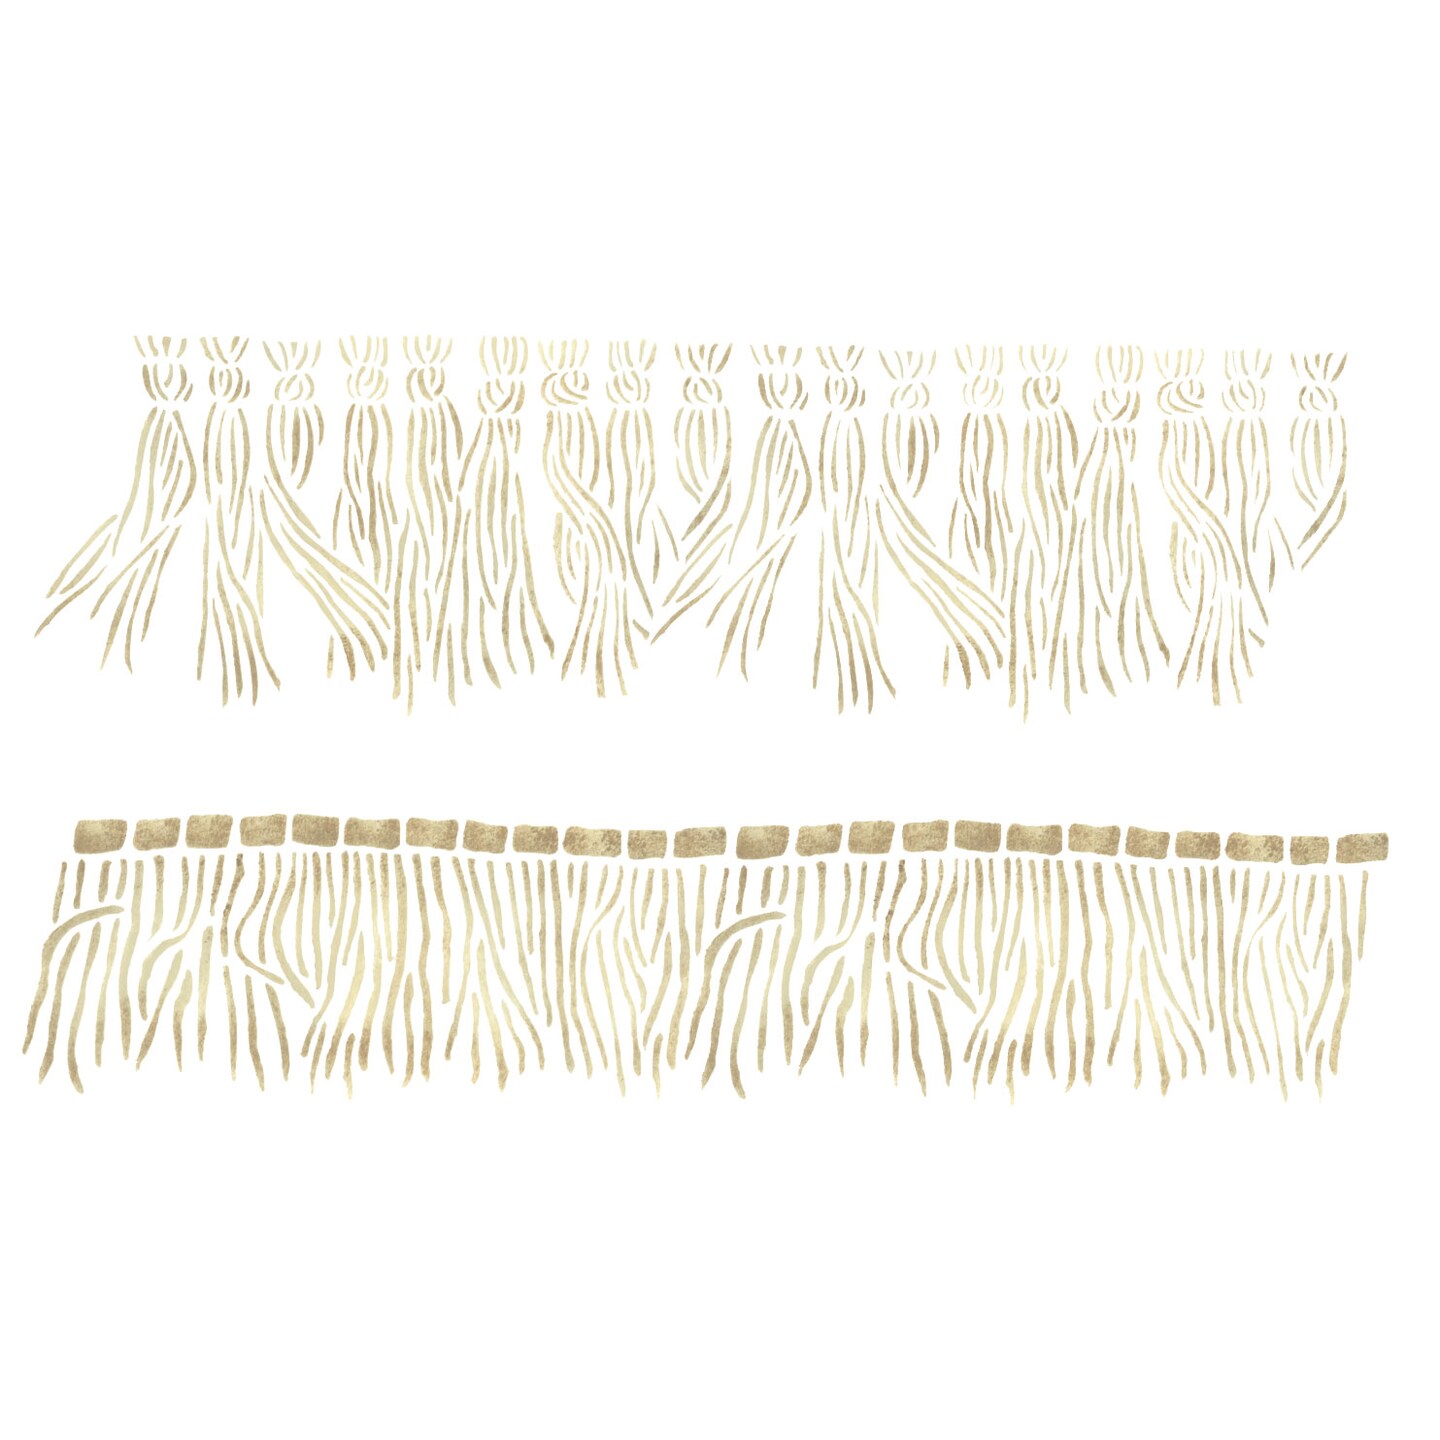 Two Different Fringe and Tassel Wall Stencil | 2865 by Designer Stencils | Pattern Stencils | Reusable Stencils for Painting | Safe &#x26; Reusable Template for Wall Decor | Try This Stencil Instead of a Wallpaper | Easy to Use &#x26; Clean Art Stencil Pattern